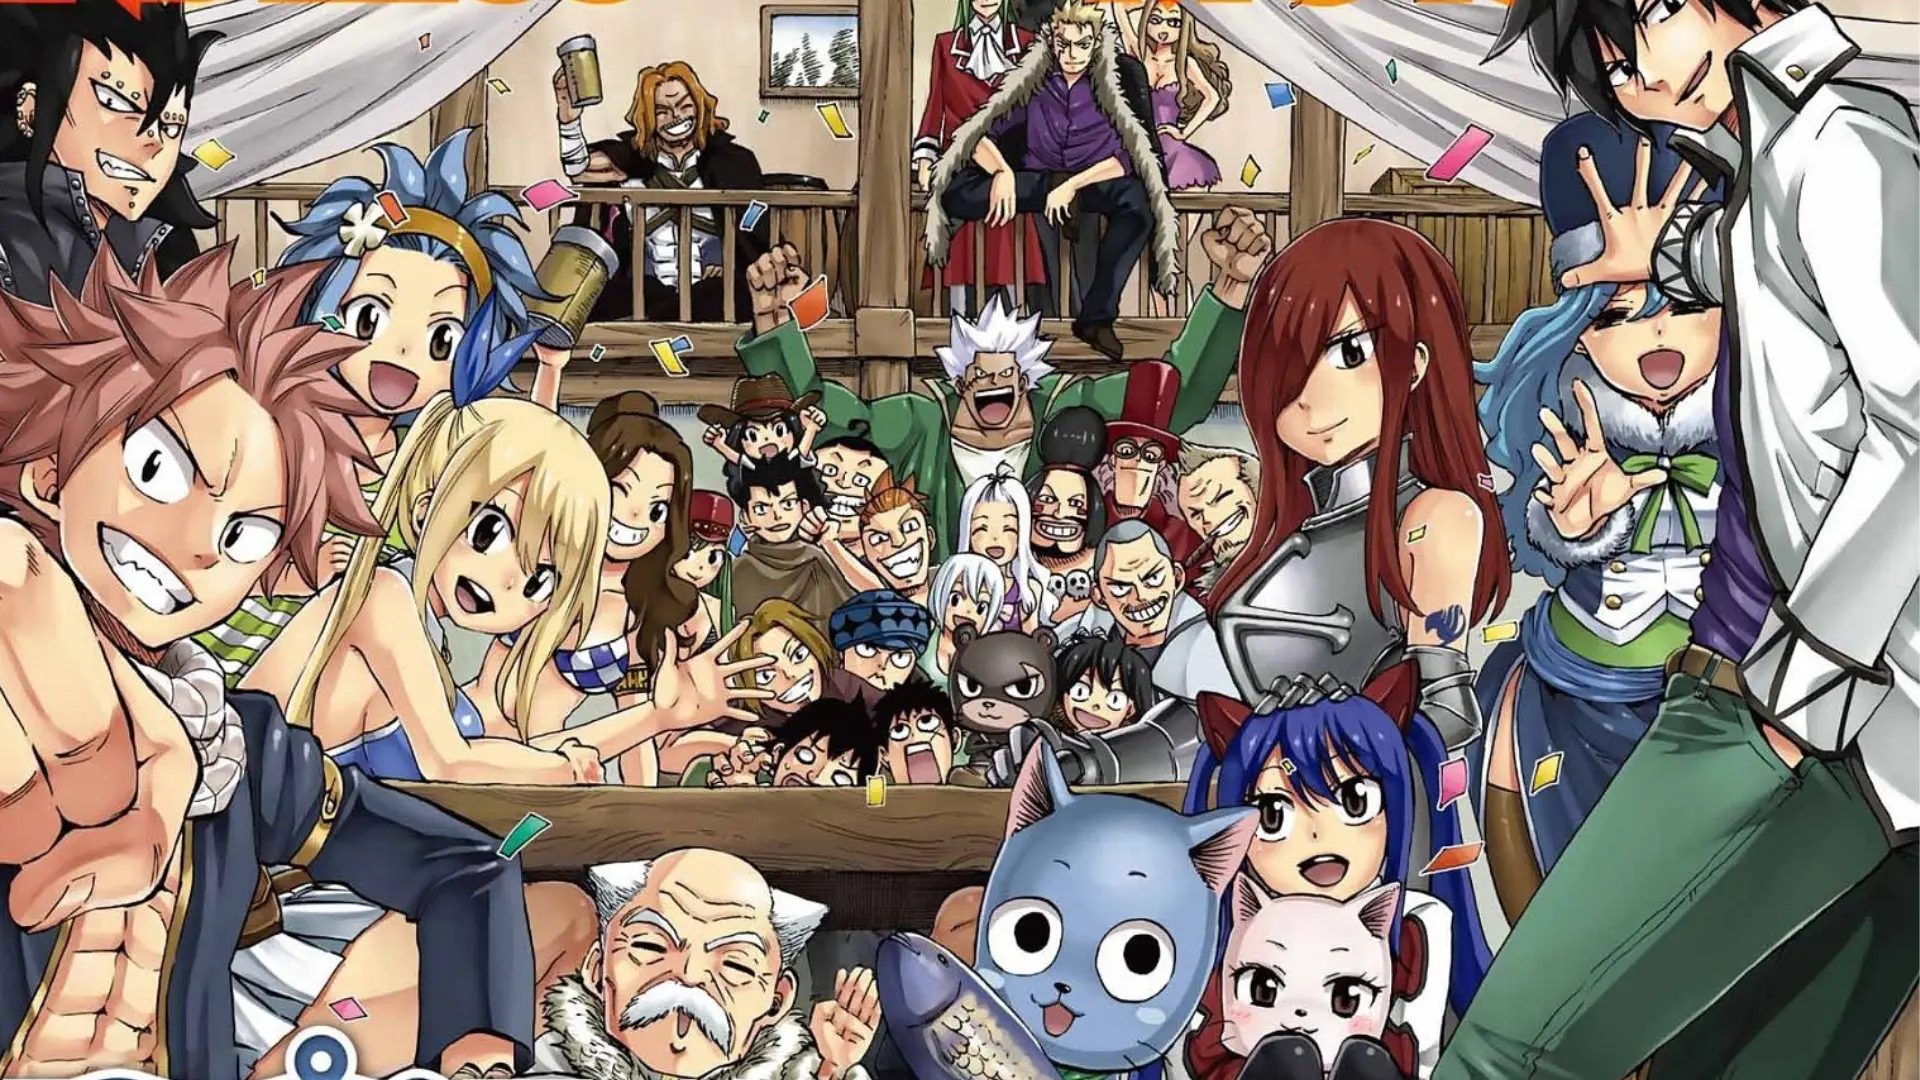 Fairy Tail 100 Years Quest Anime Release Date